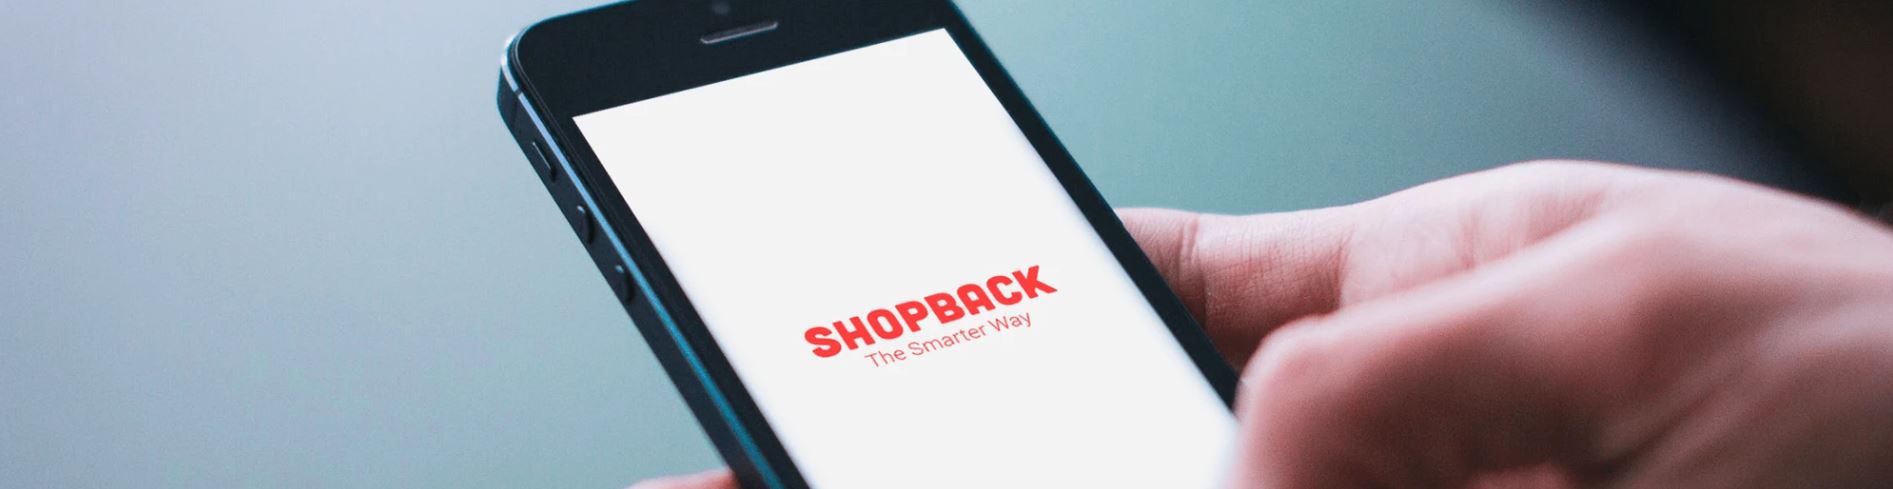 ShopBack closes extended US$75M funding round led by Temasek